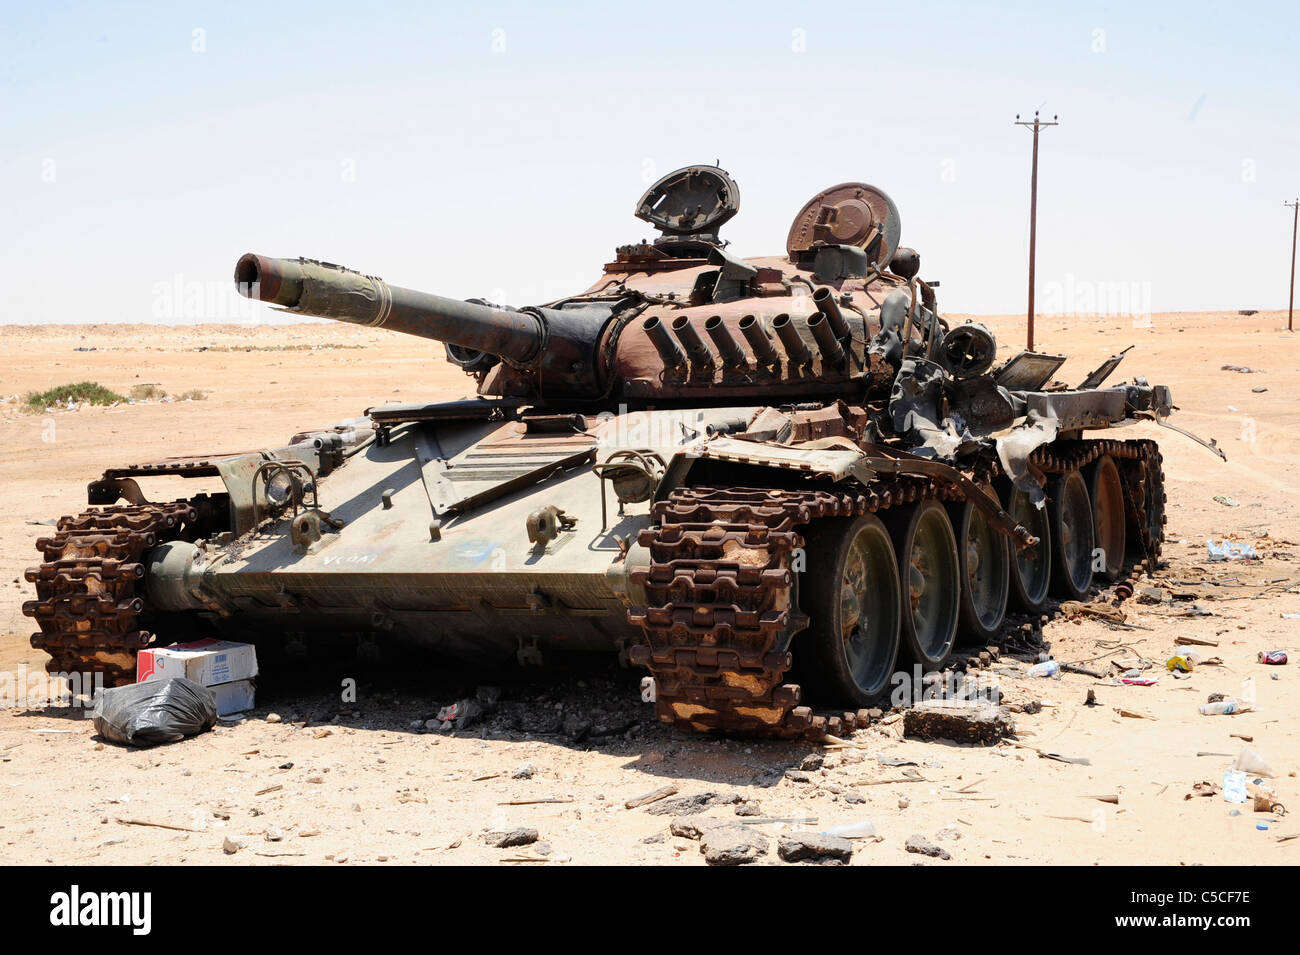 a-blow-up-destroyed-t80-libya-tank-in-th